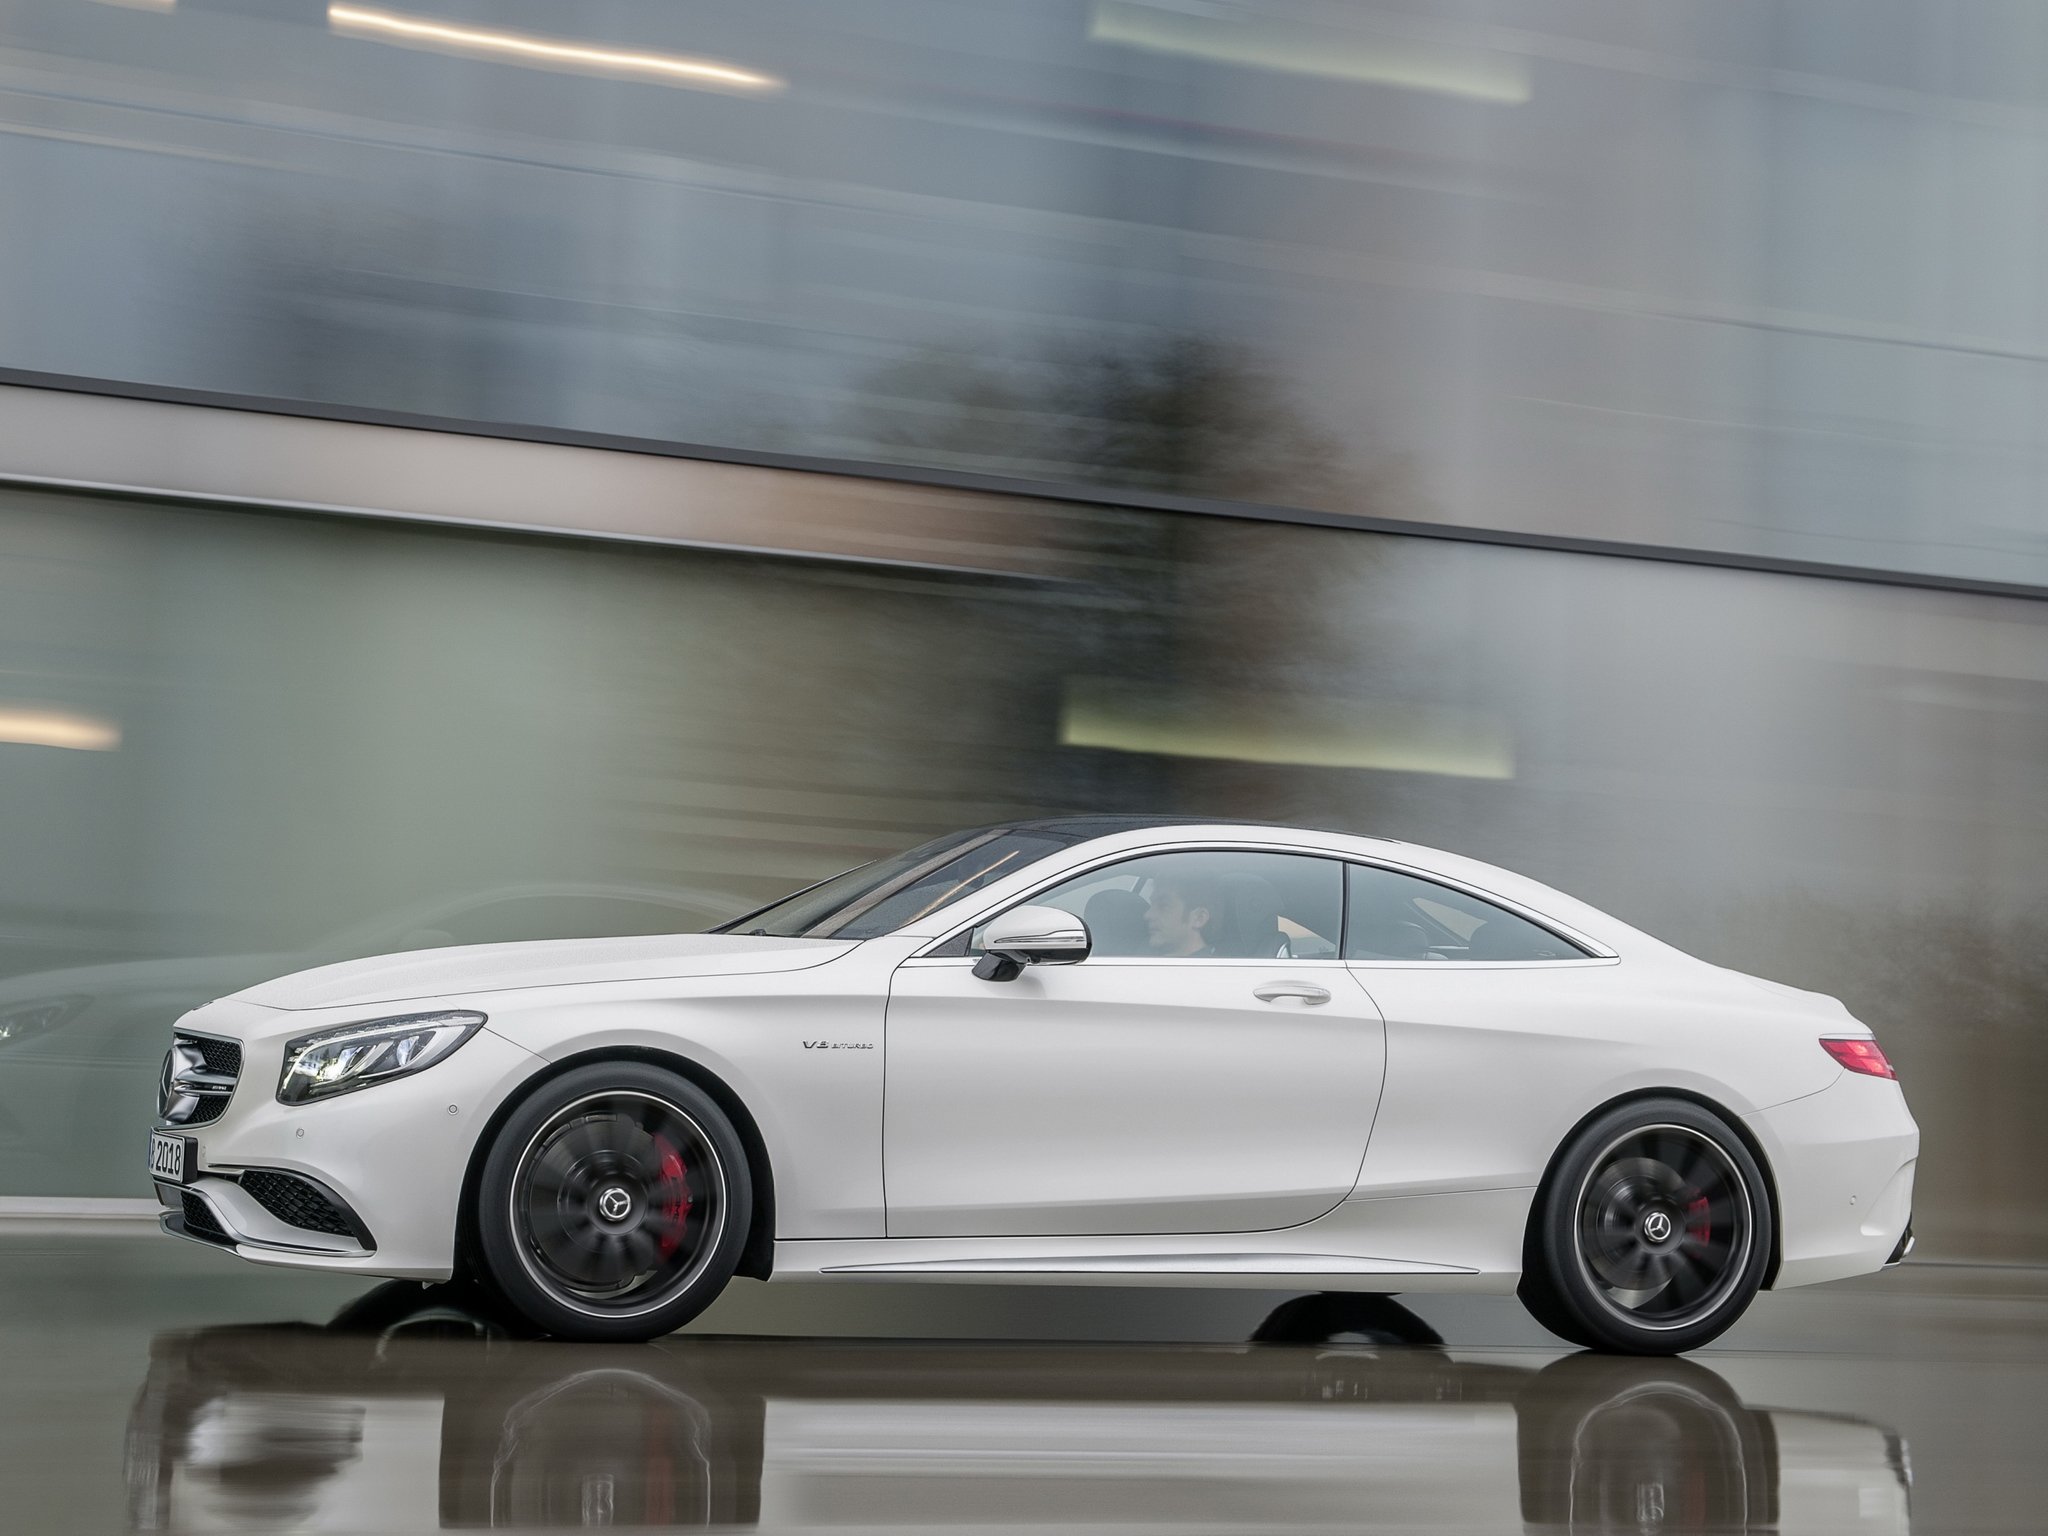 2014, Mercedes, Benz, S63, Amg, Coupe,  c217 Wallpaper